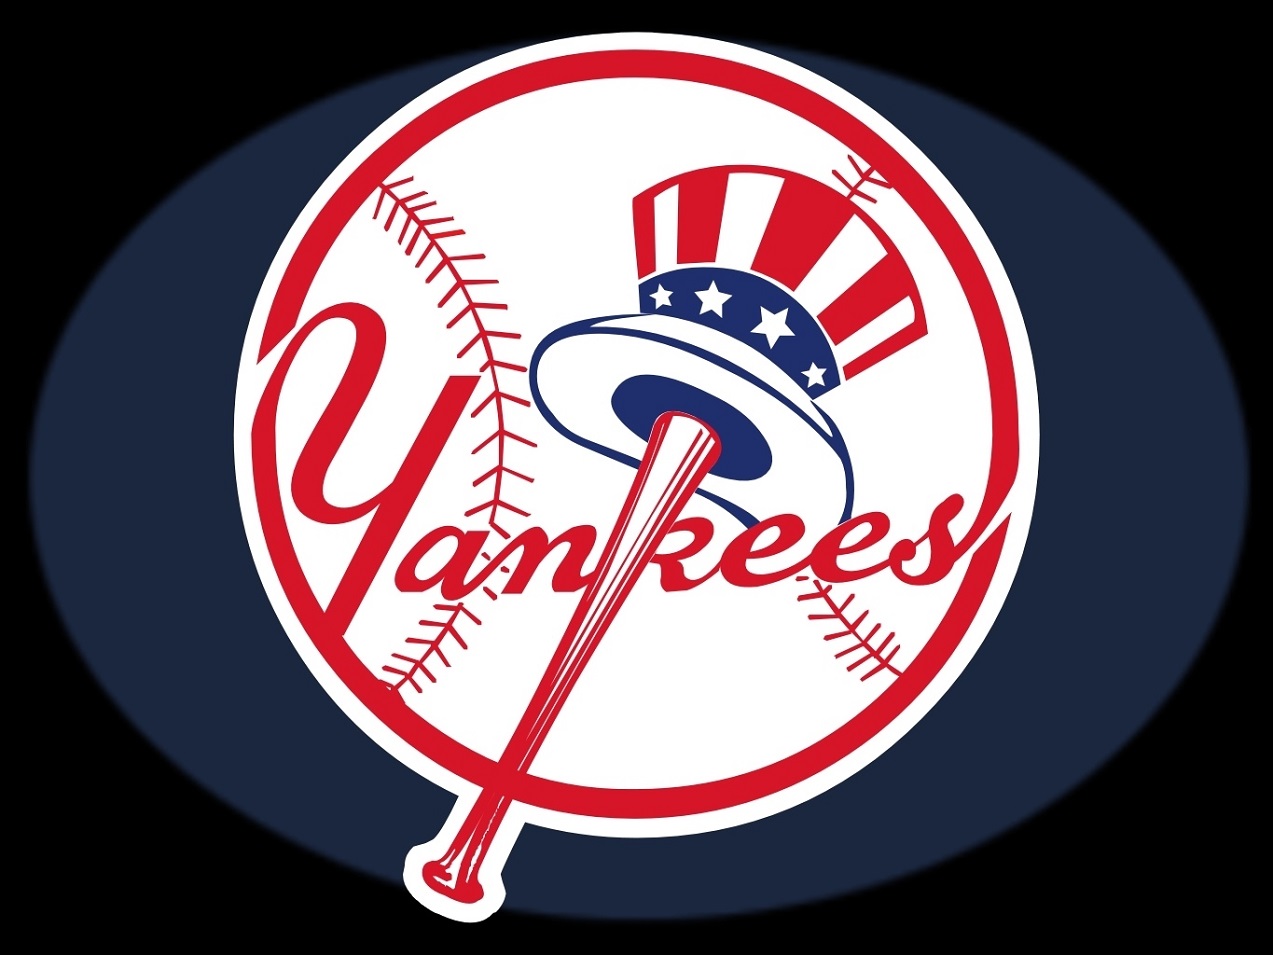 NY YANKEES SCHEDULE